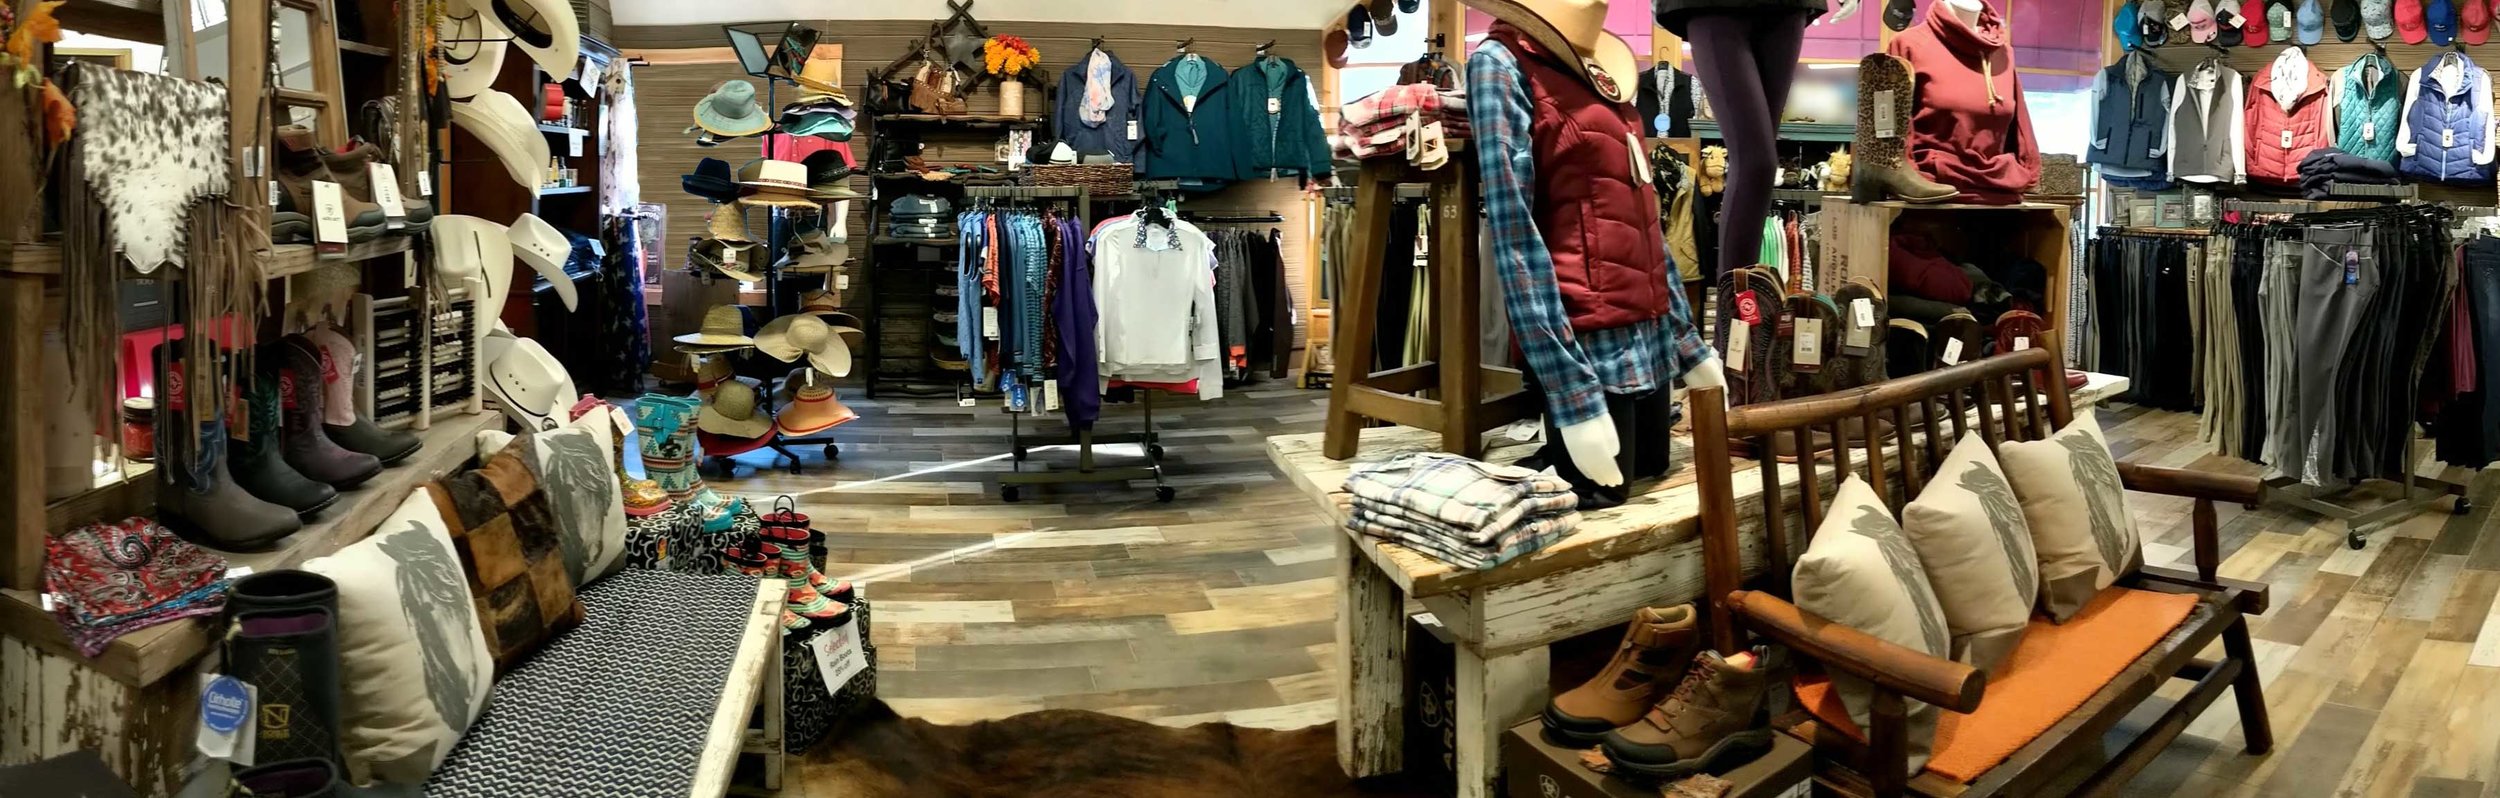 clothing department featuring western and english riding apparel